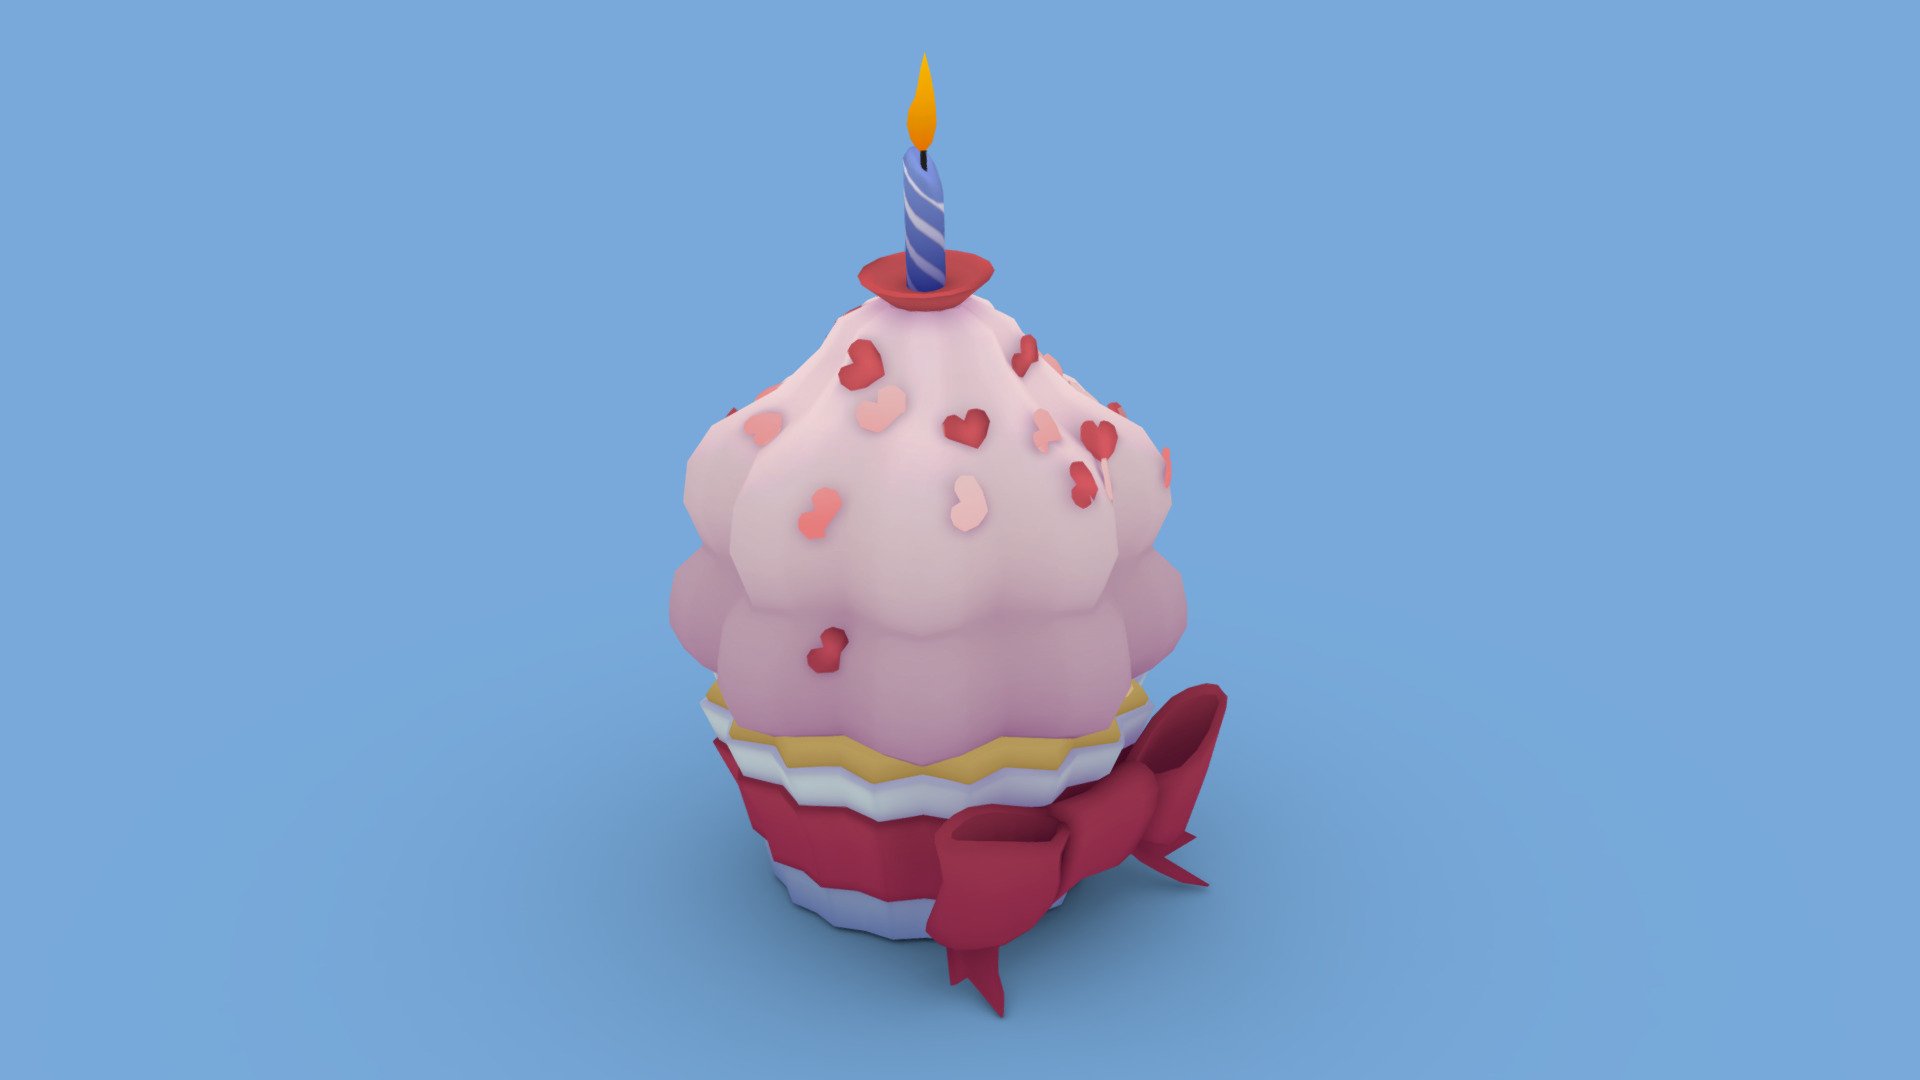 Model: Blender
Texture: Substance Painter

From Sketchfab Weekly Challenge Prompt

8 - Birthday - Cupcake - Birthday - Download Free 3D model by kuayarts 3d model